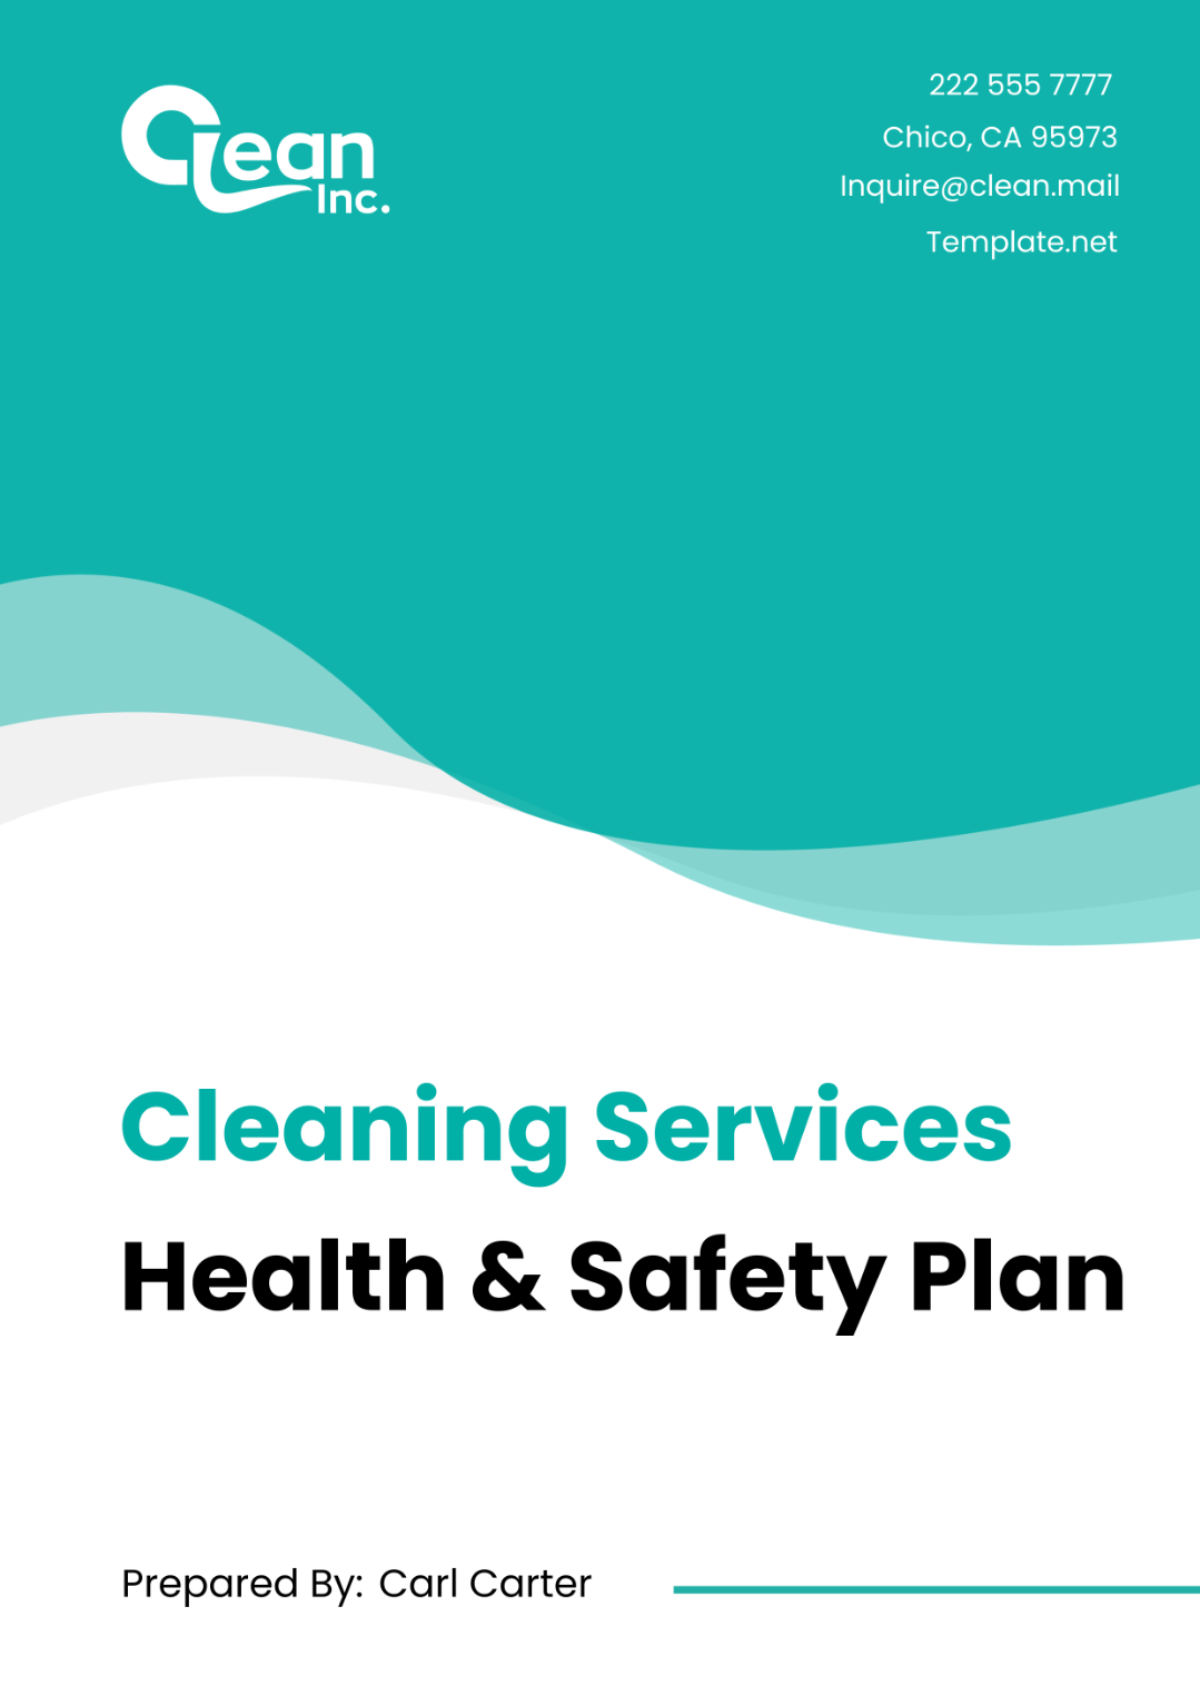 Cleaning Services Health & Safety Plan Template